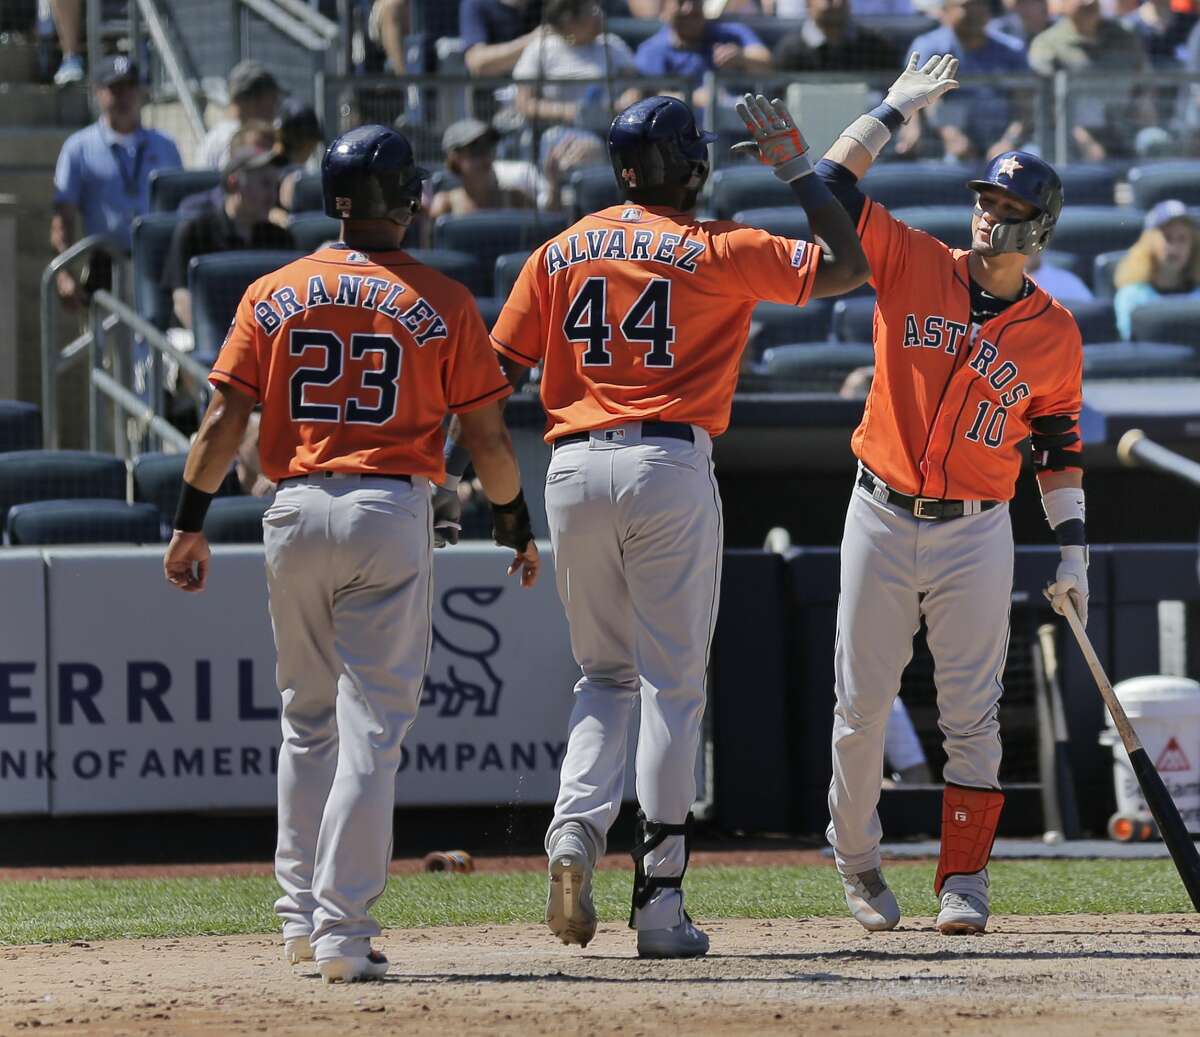 Houston Astros' Yordan Alvarez, center, celebrates his two-run home run with Yuli Gurriel, right, and Michael Brantley (23) during the fifth inning of a baseball game against the New York Yankees at Yankee Stadium, Sunday, June 23, 2019, in New York. (AP Photo/Seth Wenig)